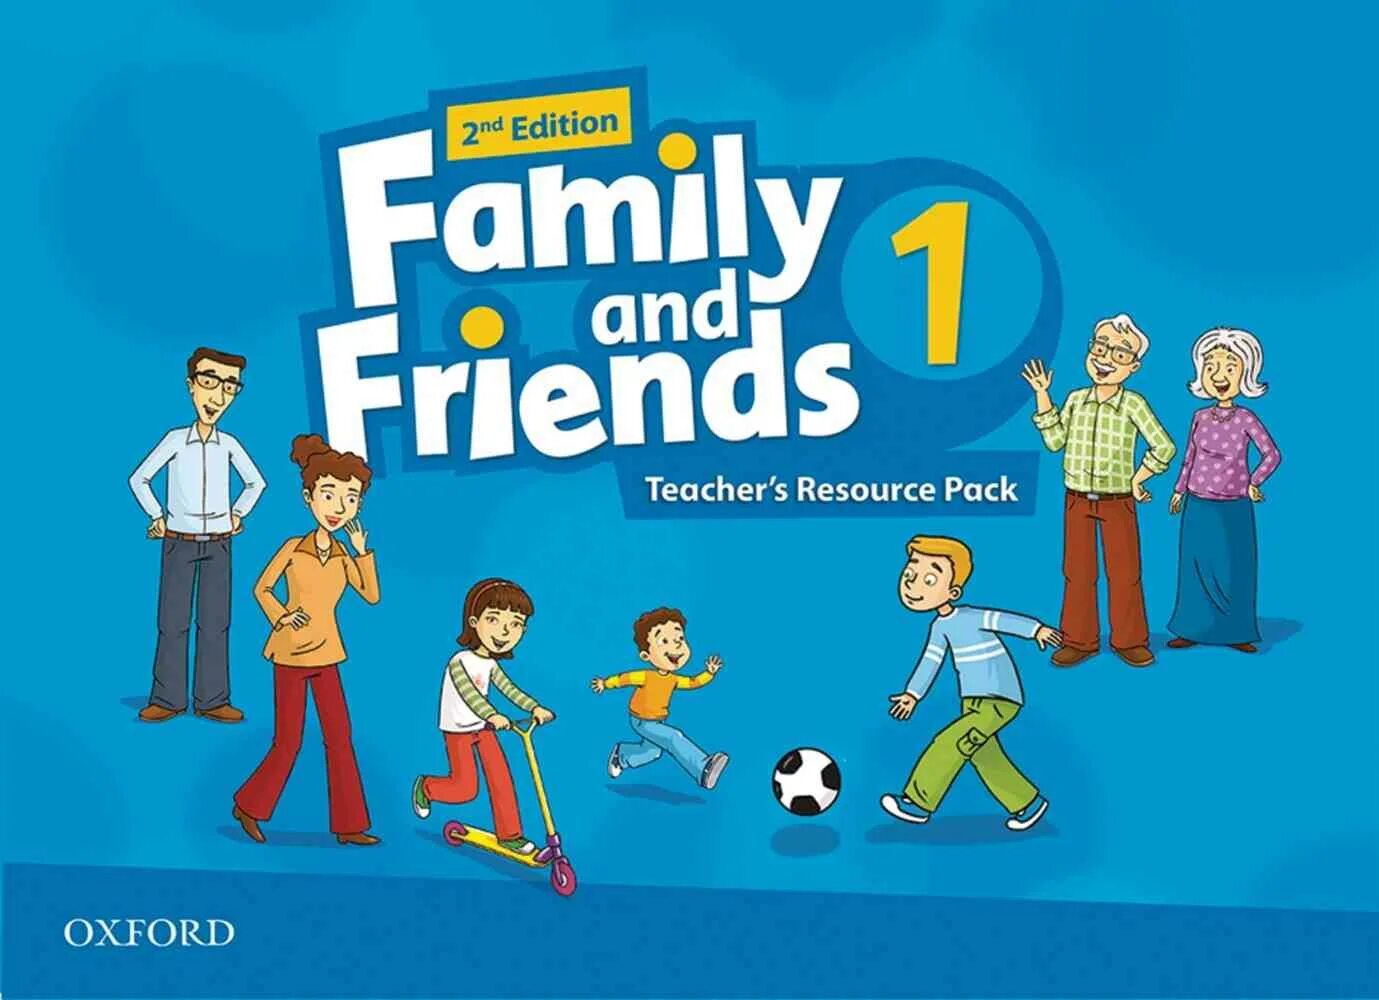 Family and friends 1 Workbook 1 и 2 издание отличия. Книга Family and friends 1. Фэмили энд френдс 2. Family and friends 2 second Edition.